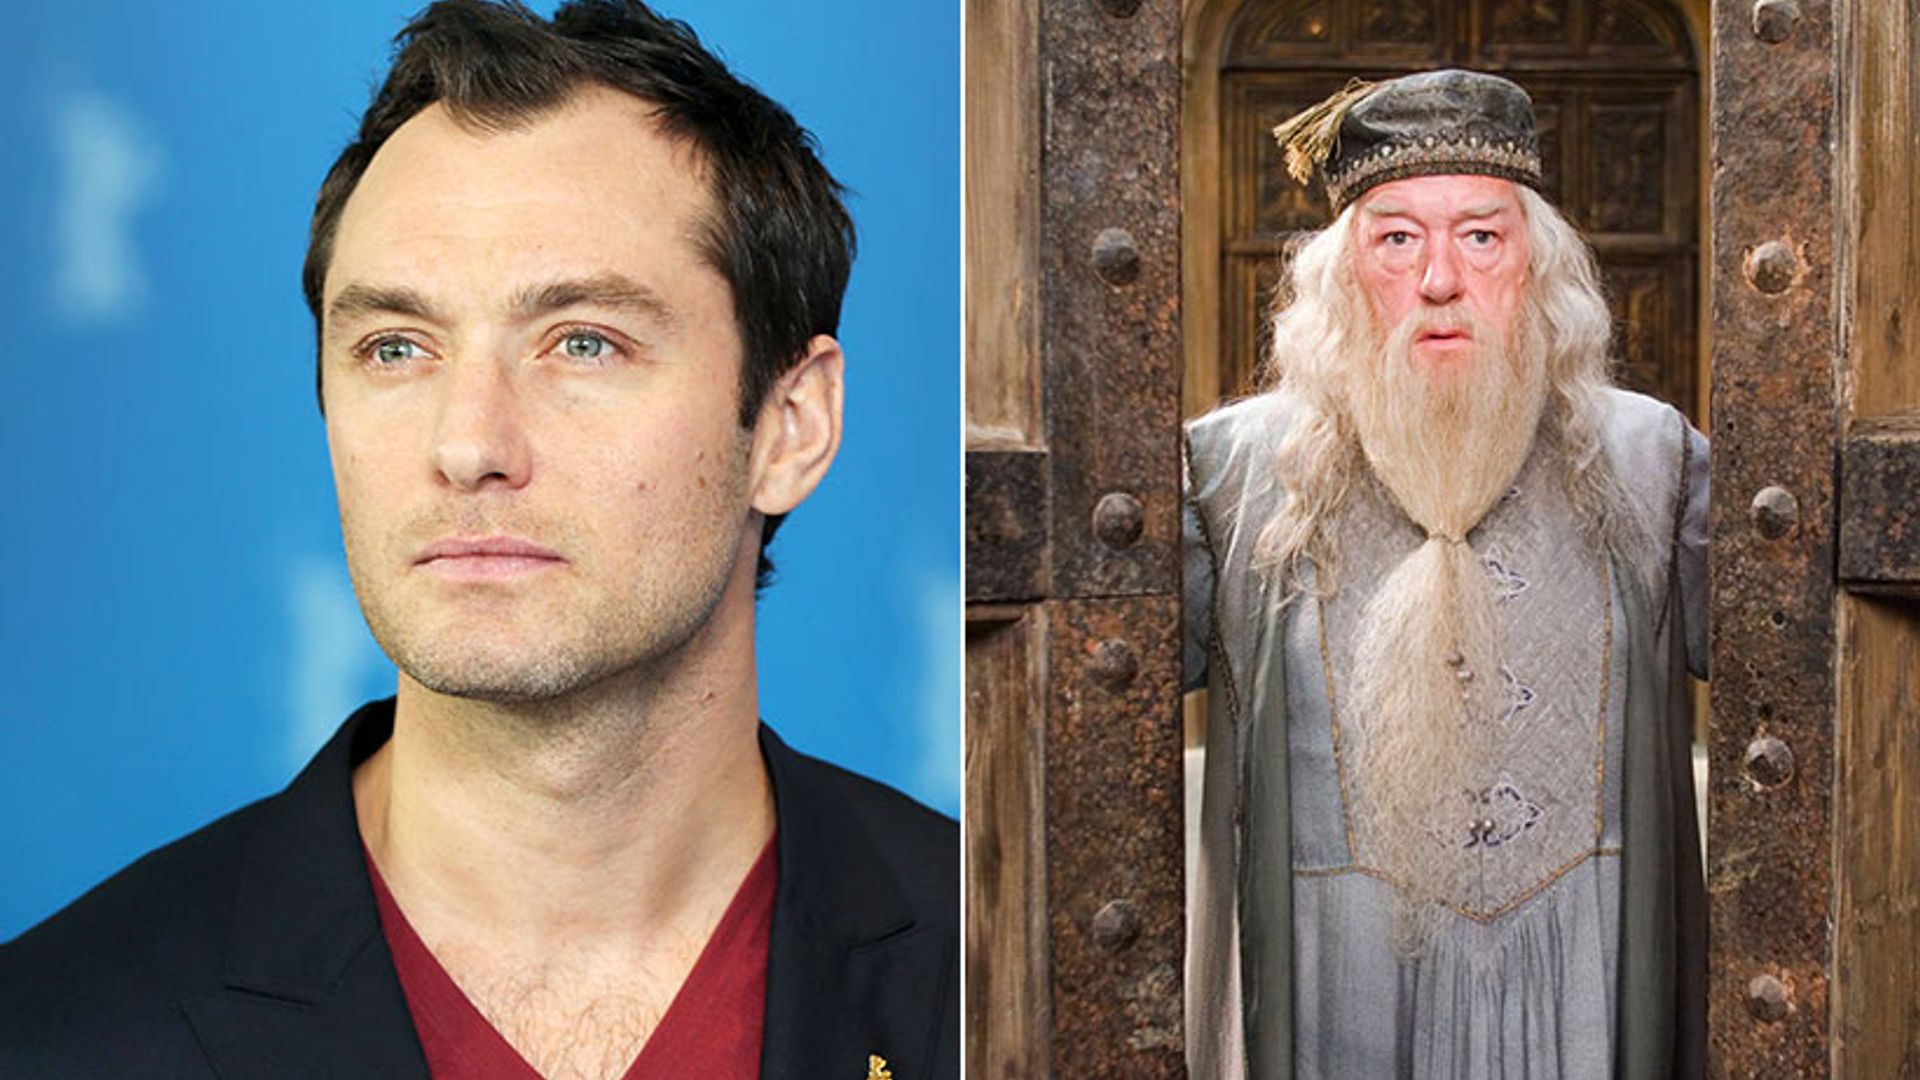 Jude Law to play young Dumbledore in Fantastic Beasts and Where to Find Them franchise